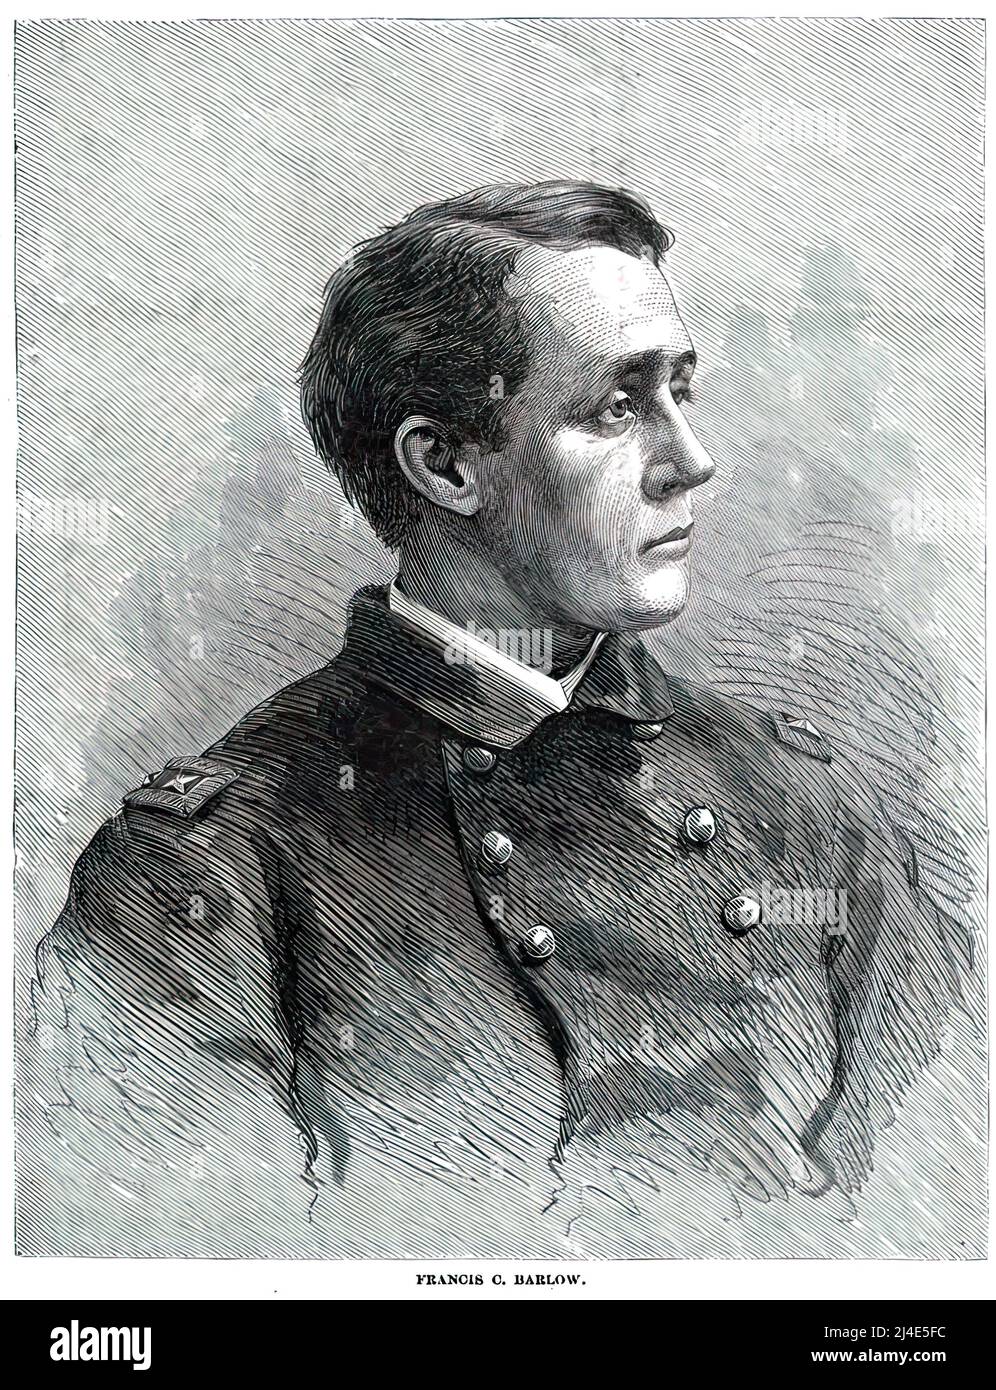 Francis Channing Barlow, lawyer, politician and Union Army General in the American Civil War. 19th century illustration. Stock Photo